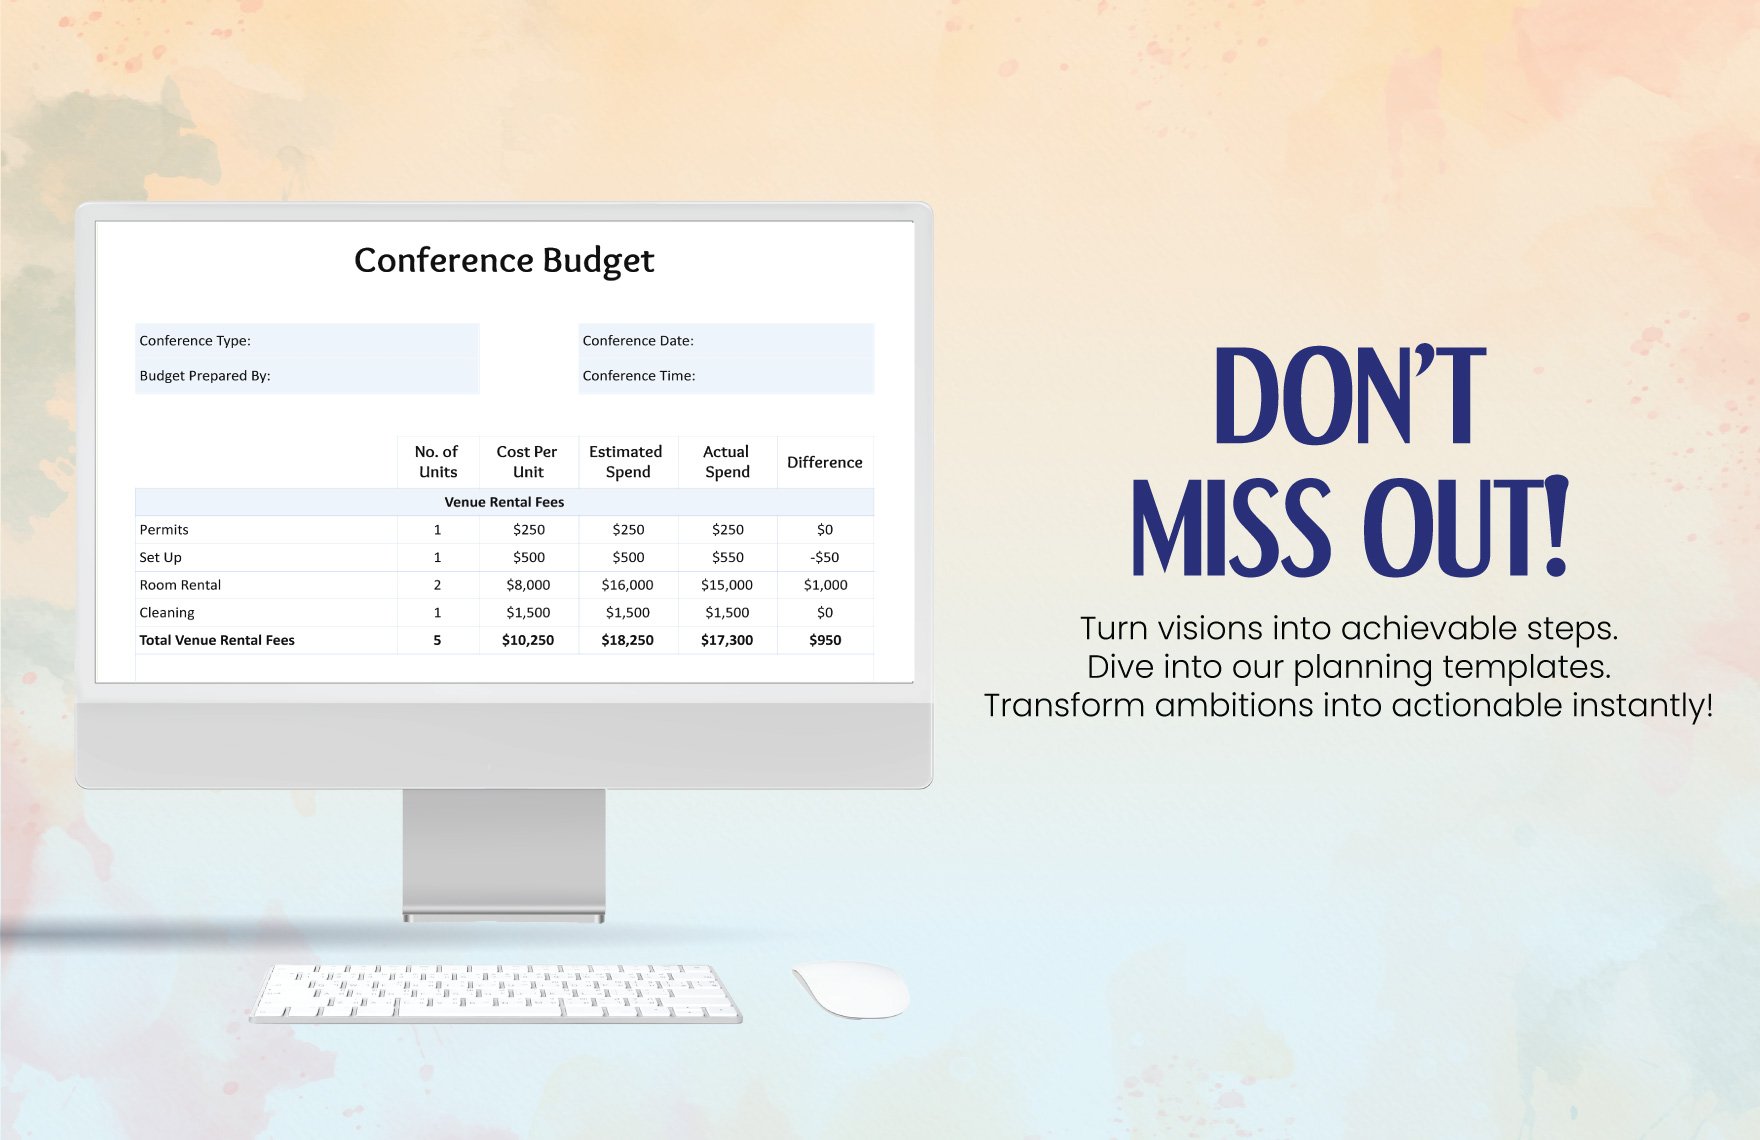 Small Conference Budget Template